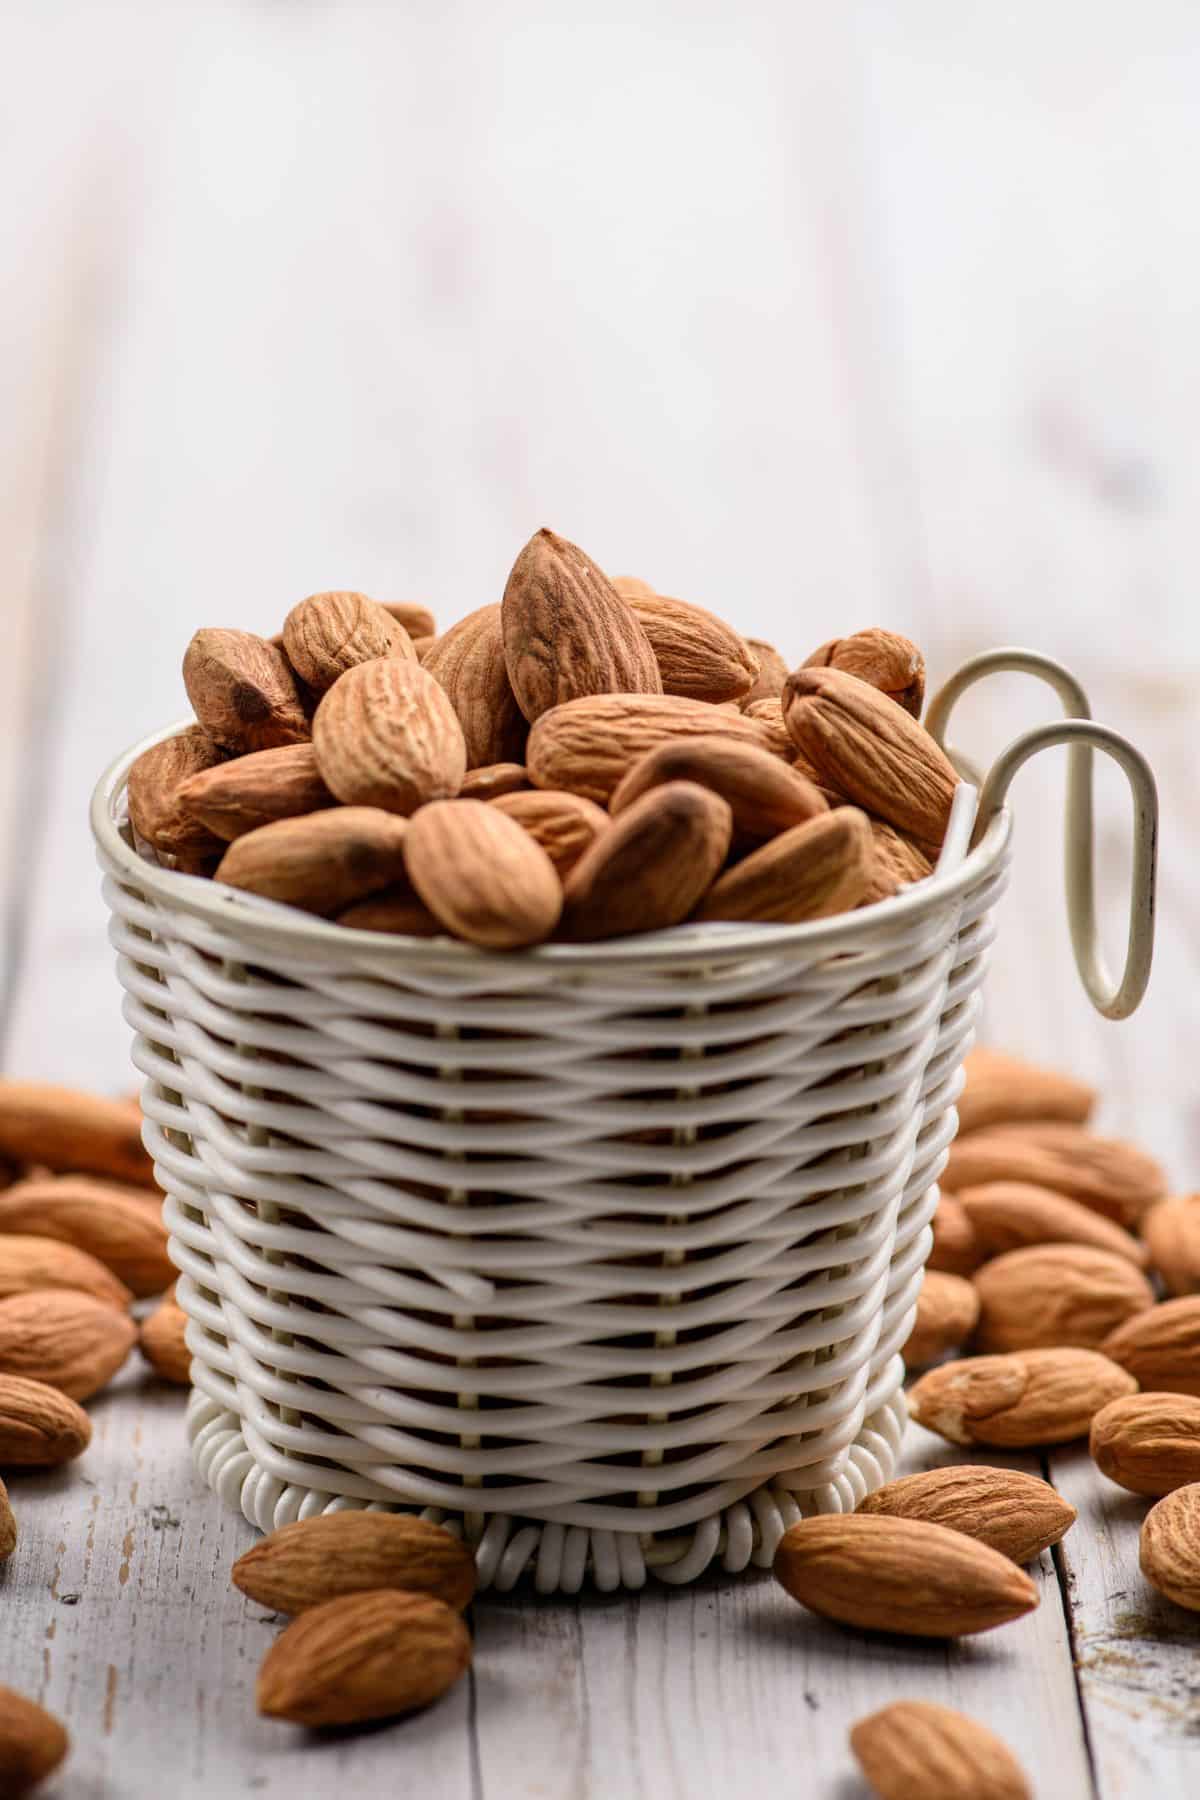 Container of almonds with almonds on table.